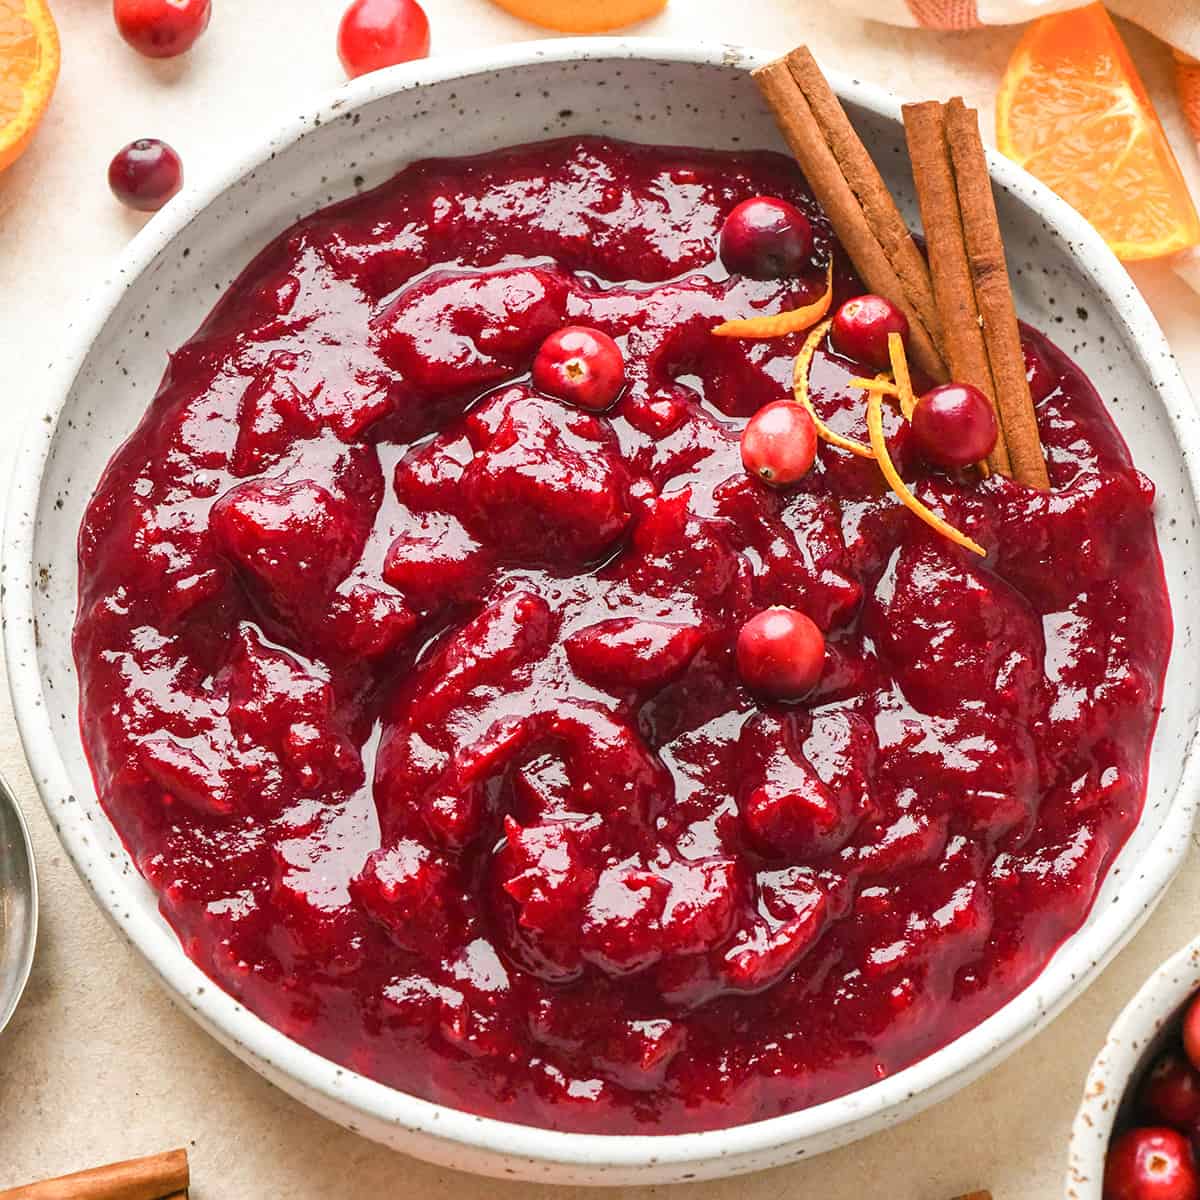 a bowl of homemade cranberry sauce garnished with fresh cranberries, orange peel and cinnamon sticks